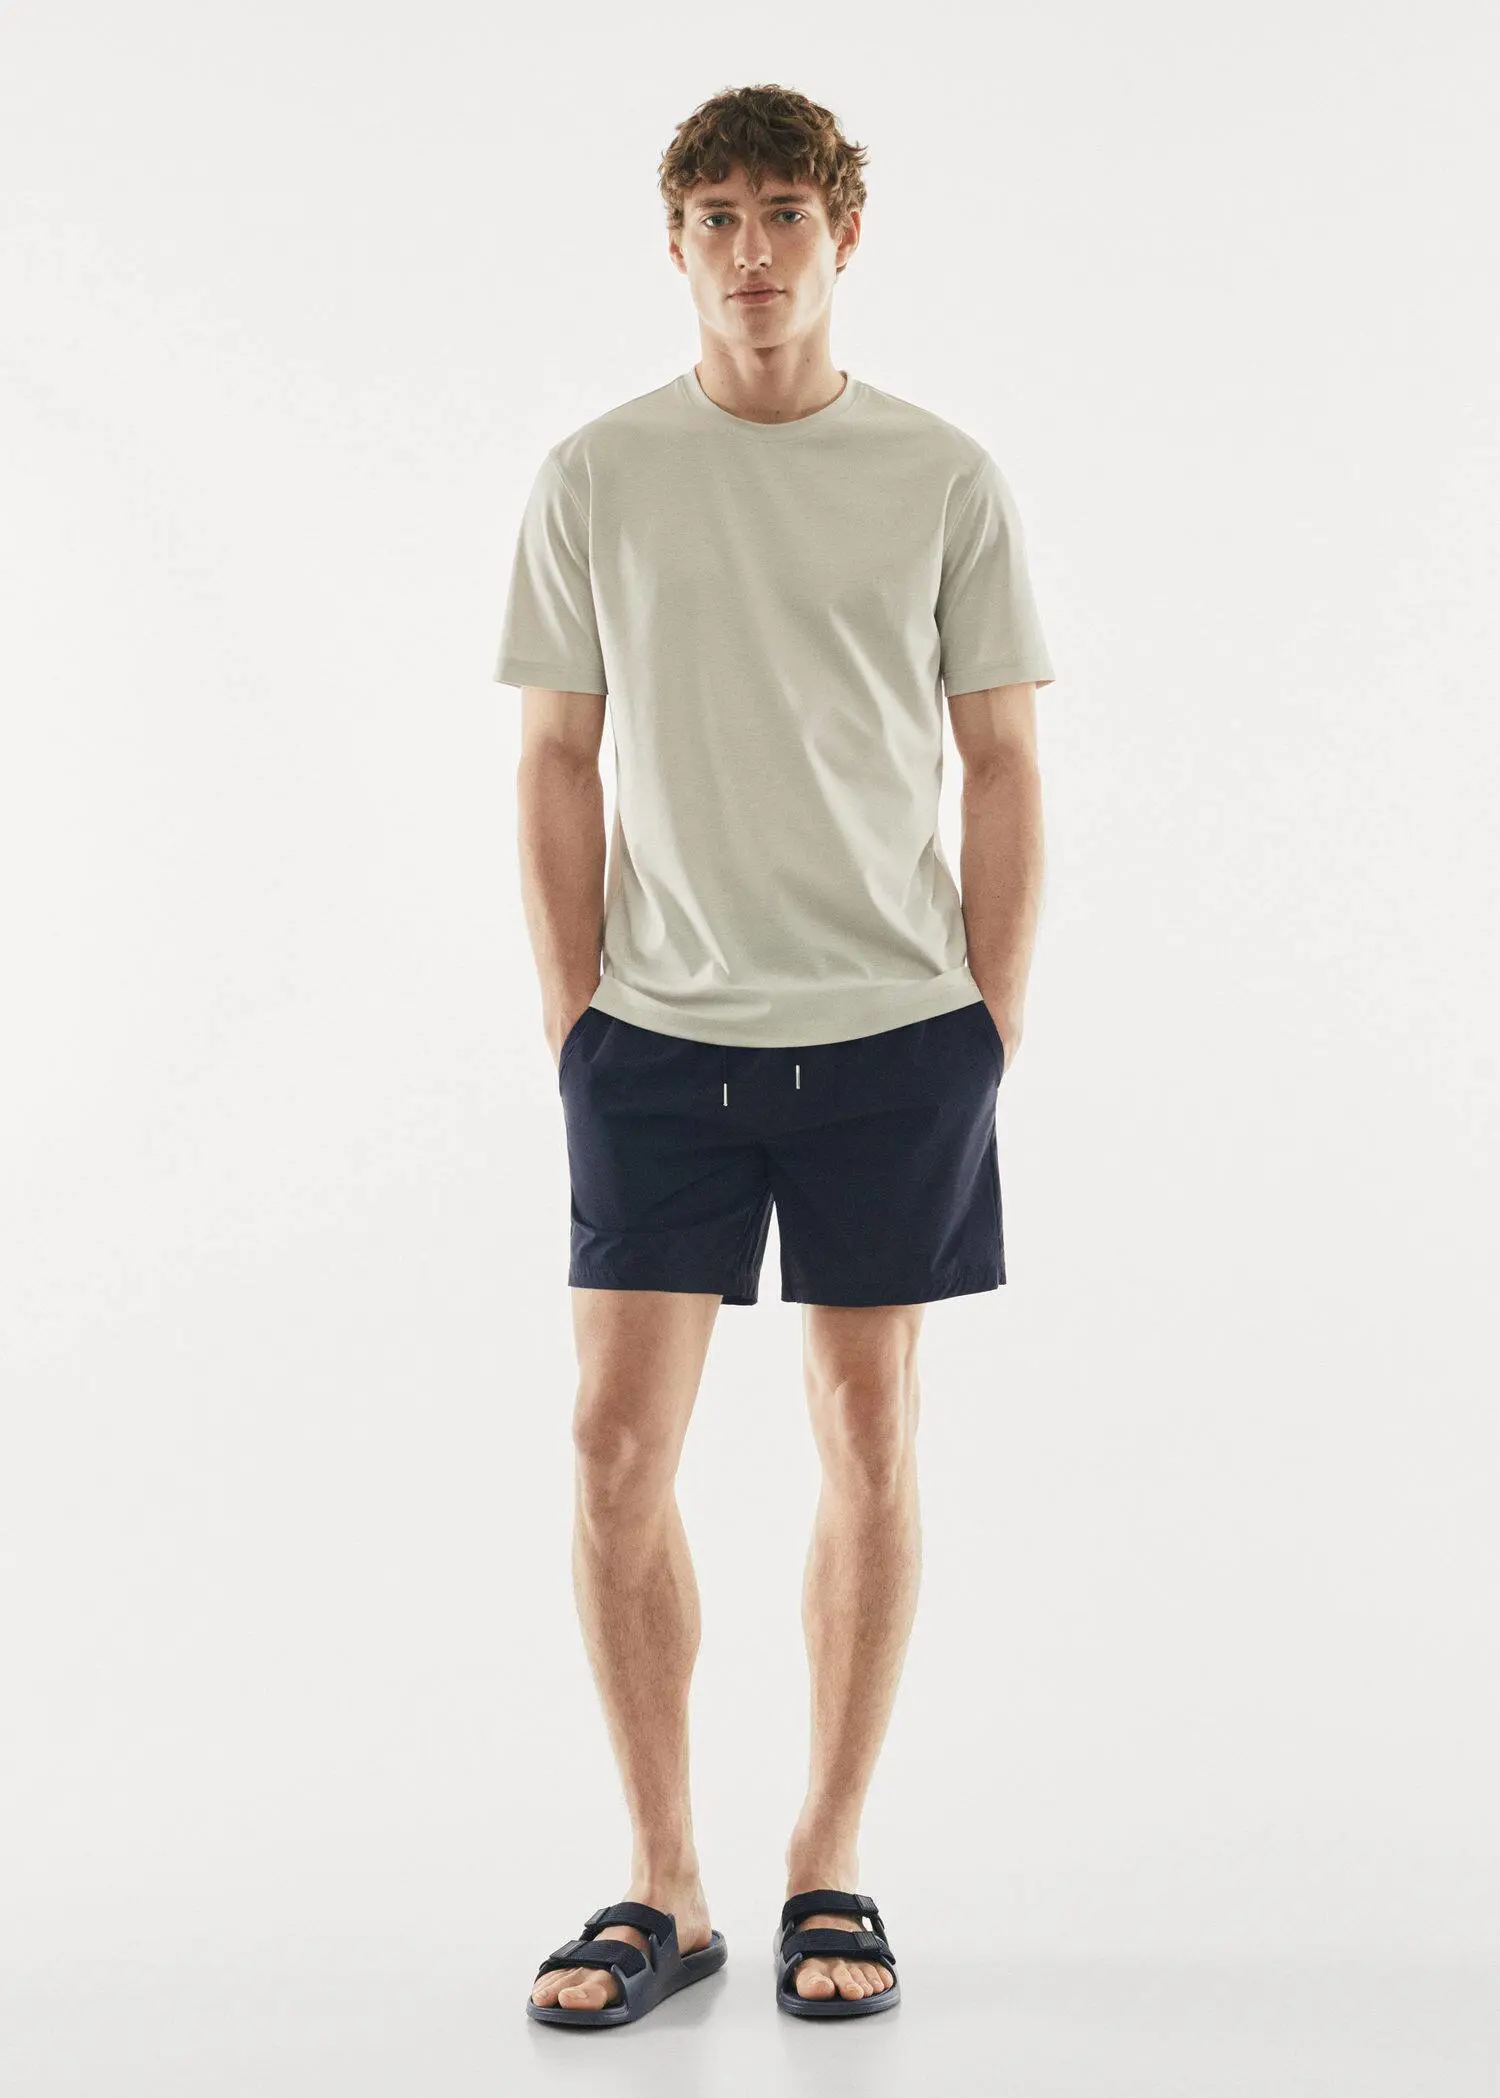 Mango Cord plain swimming trunks. a young man in a white t-shirt and black shorts. 